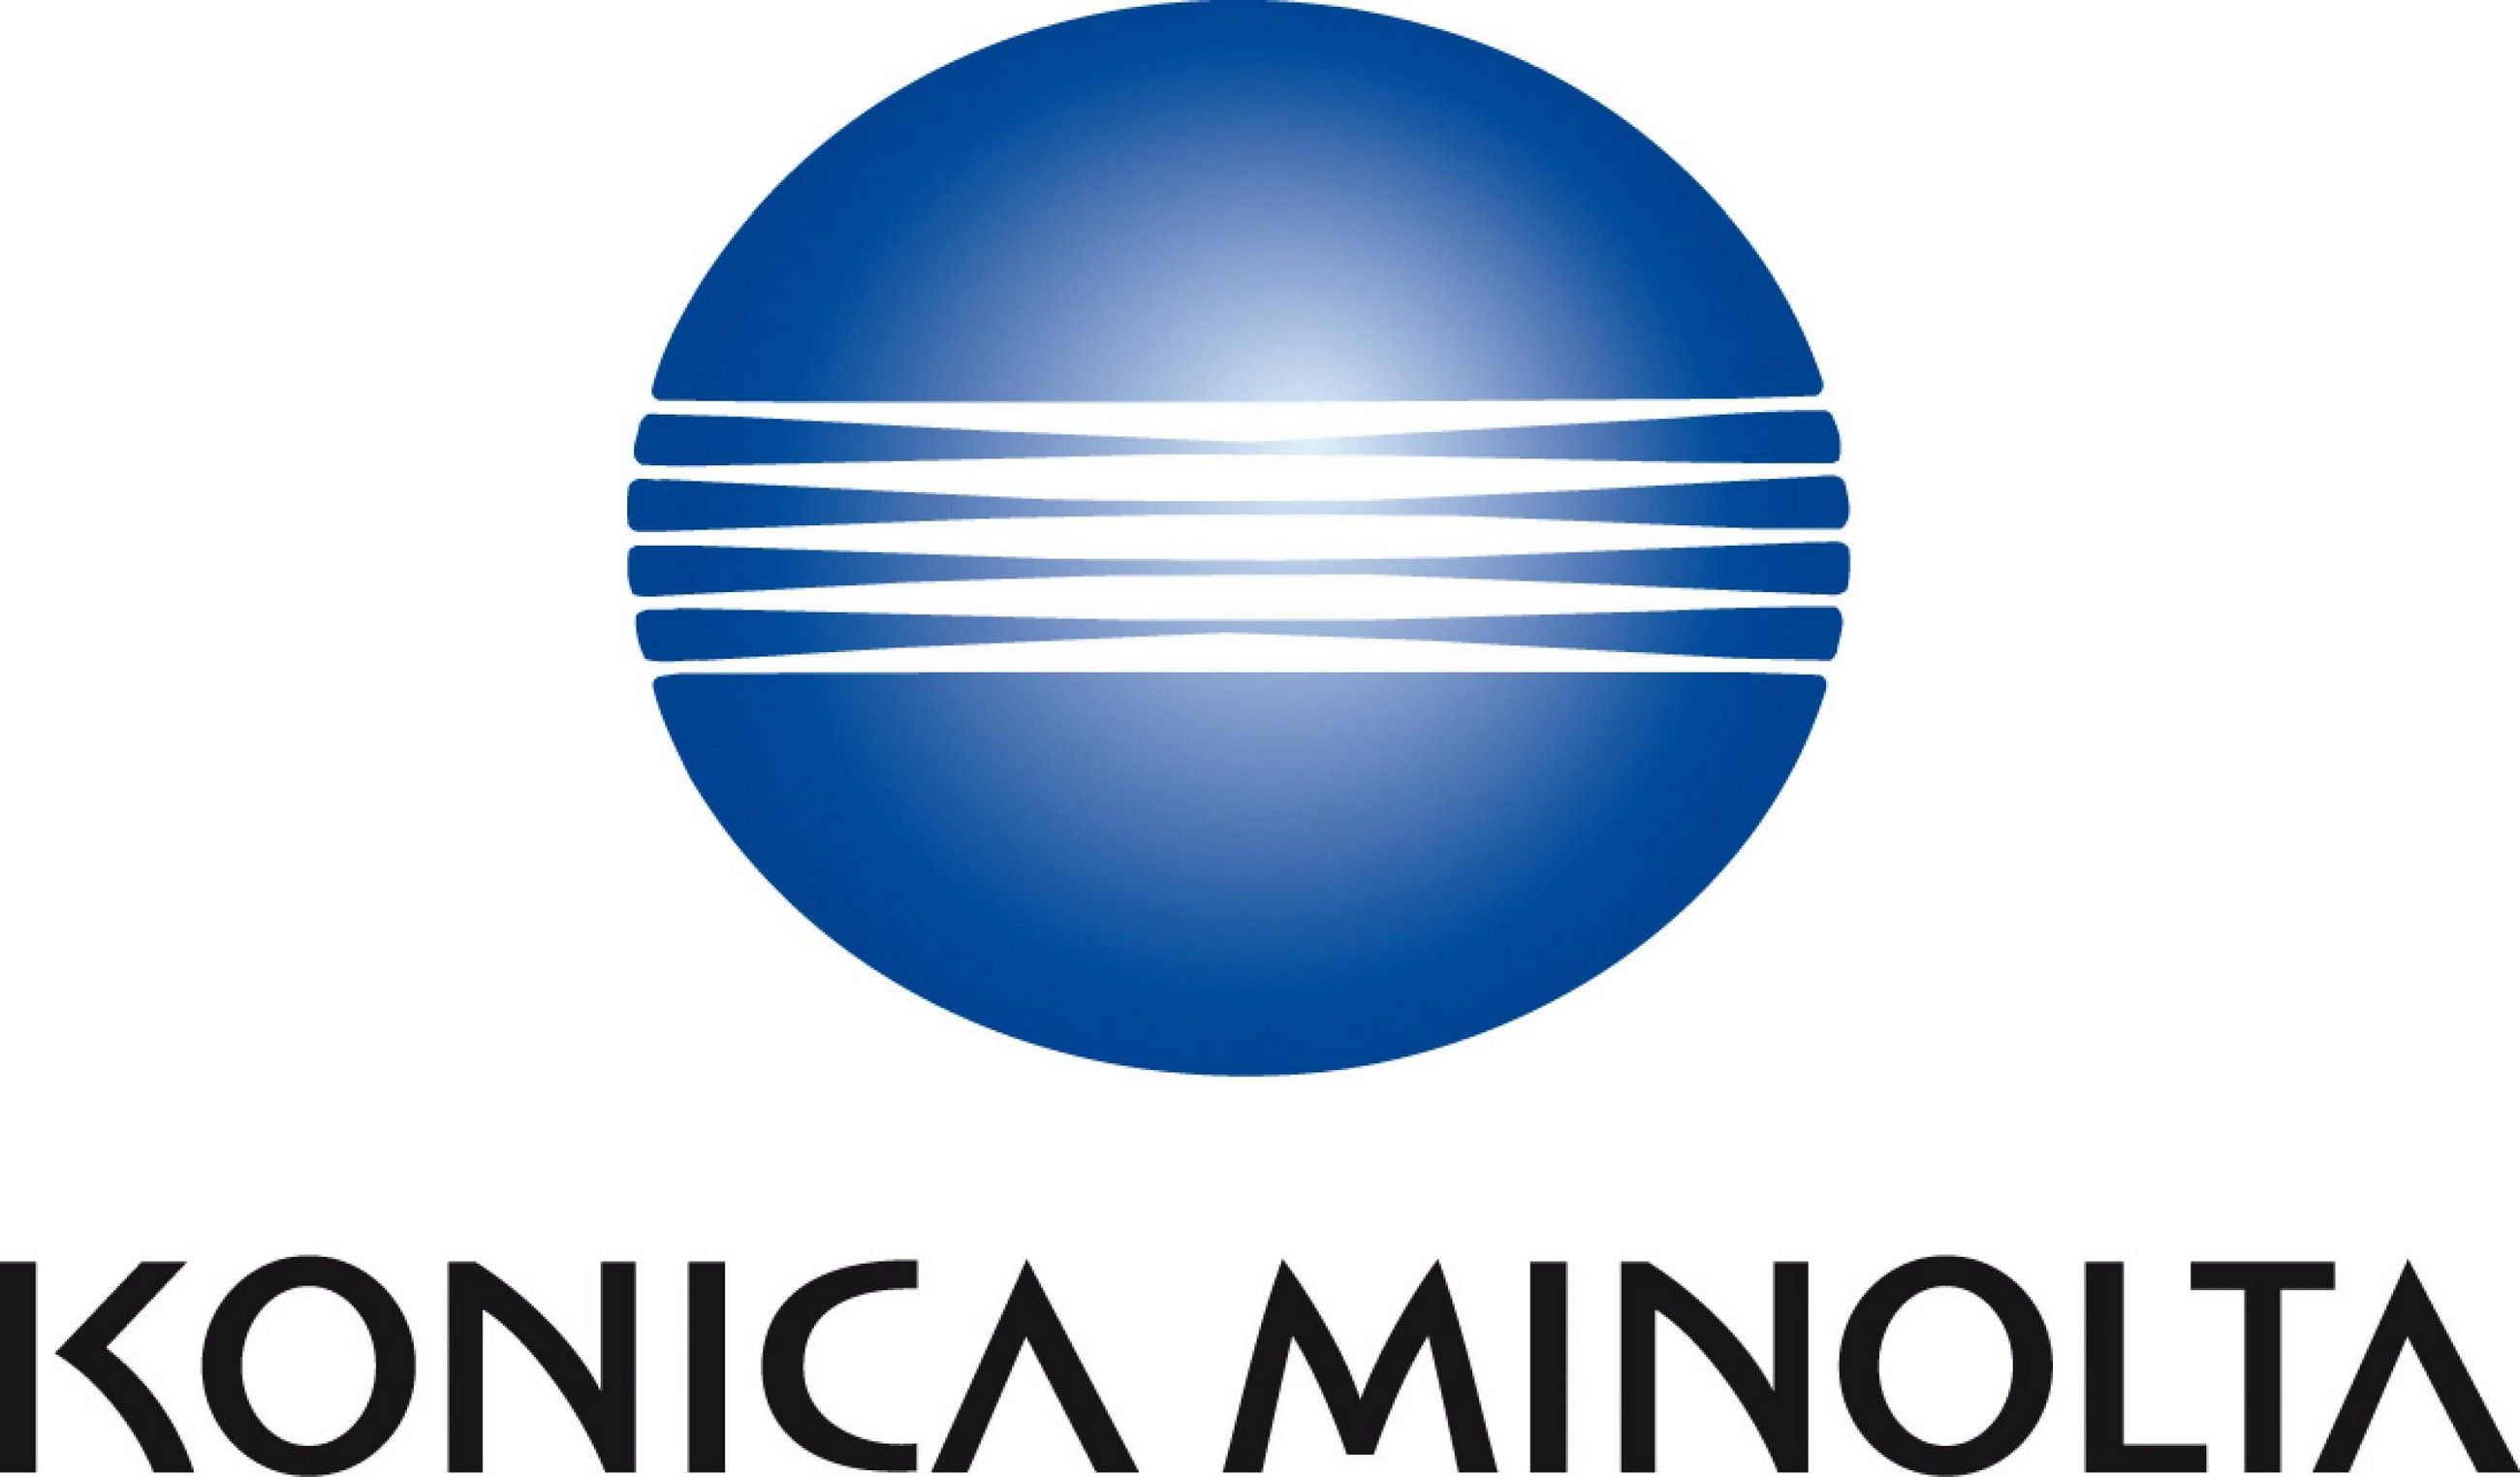 Konica Minolta to celebrate Pride Month 2021 with a global virtual event on ‘Unlocking the power of diversity through authenticity and allyship’ 